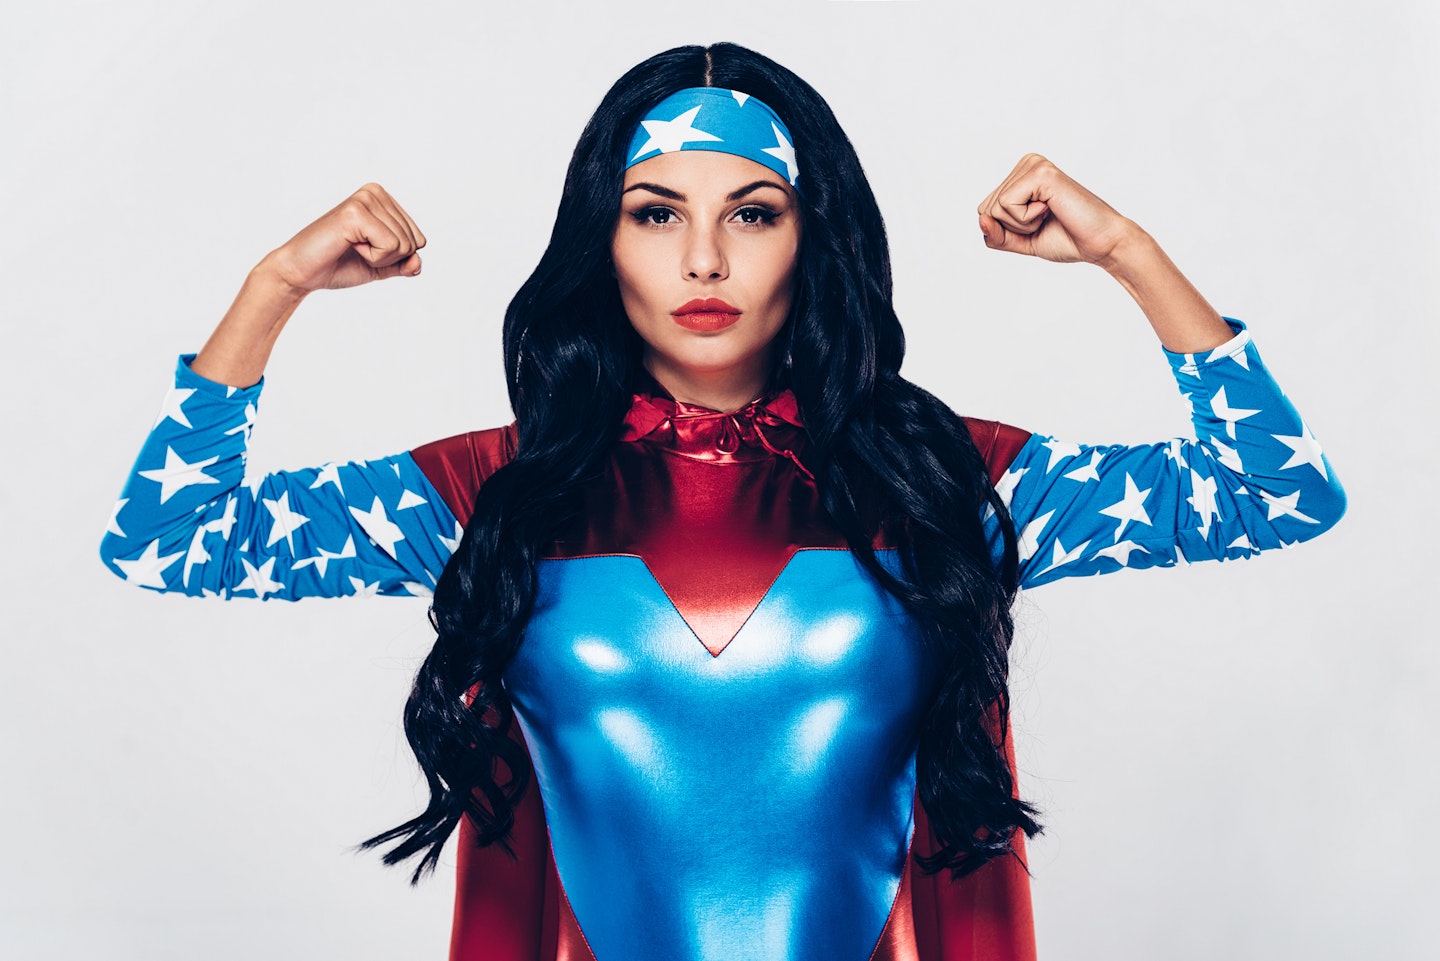 Woman in Super Woman costume in strong pose